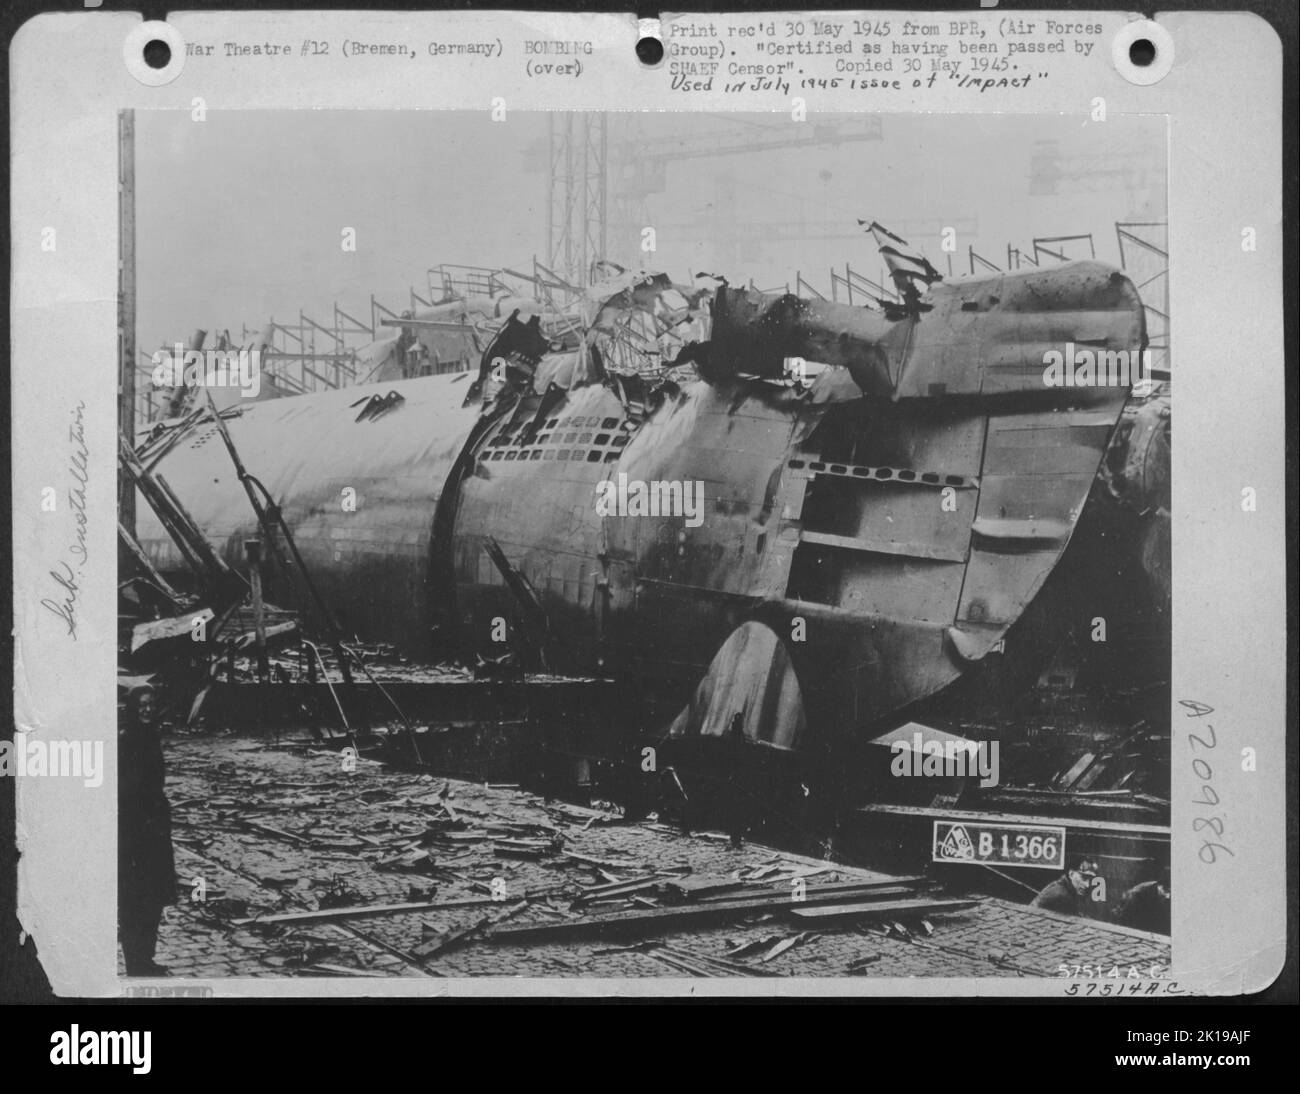 Carrying The Stamp Of The Official Photographer Of Deshimag'S Bremen Shipyards, This Photo Of A U-Boat Bombed While Undergoing Assembly, Shows Punctured Ballast Tanks. Note The Smooth Welded Seams Of The New Snorting U-Boat - So Called Since It Was Fitte Stock Photo